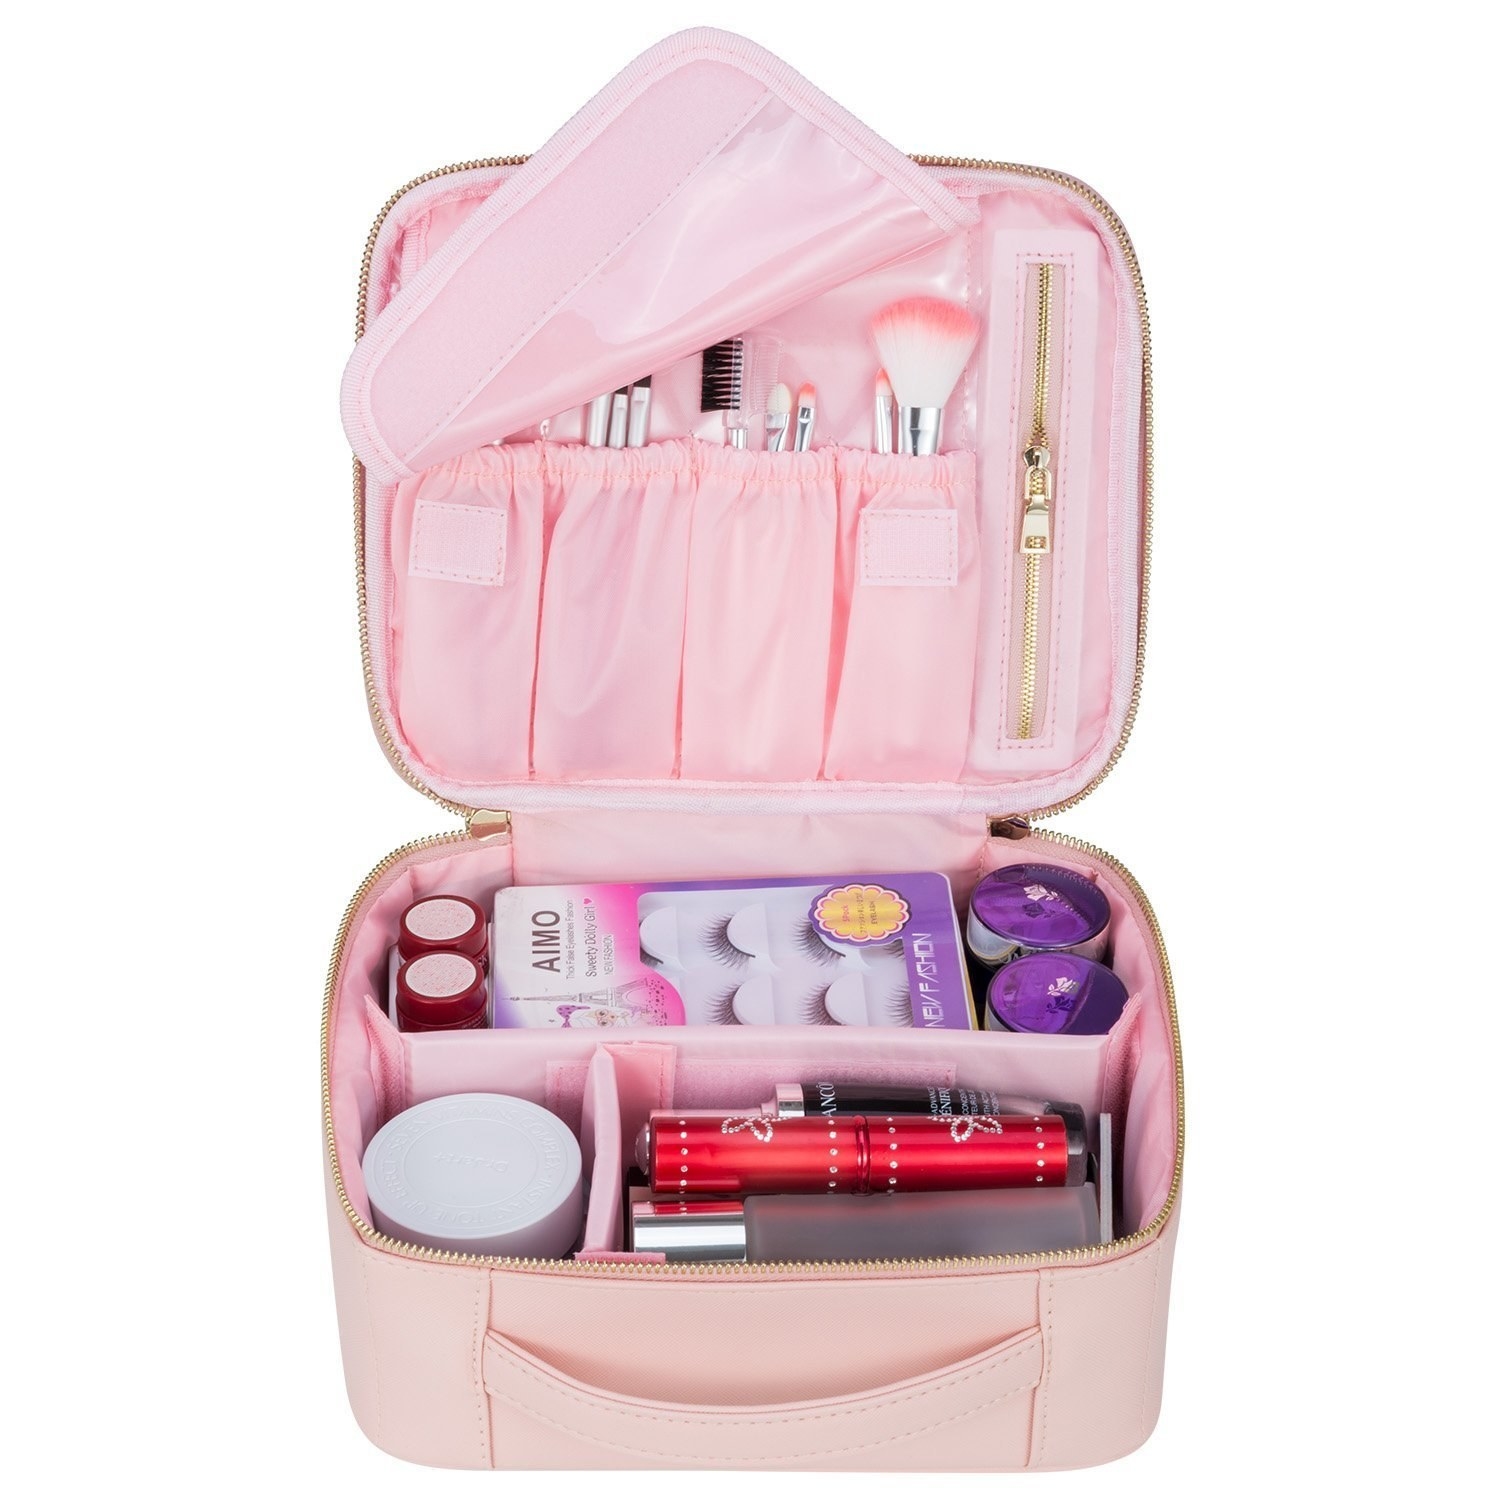 20 Of The Best Makeup And Cosmetic Bags You Can Get On Amazon